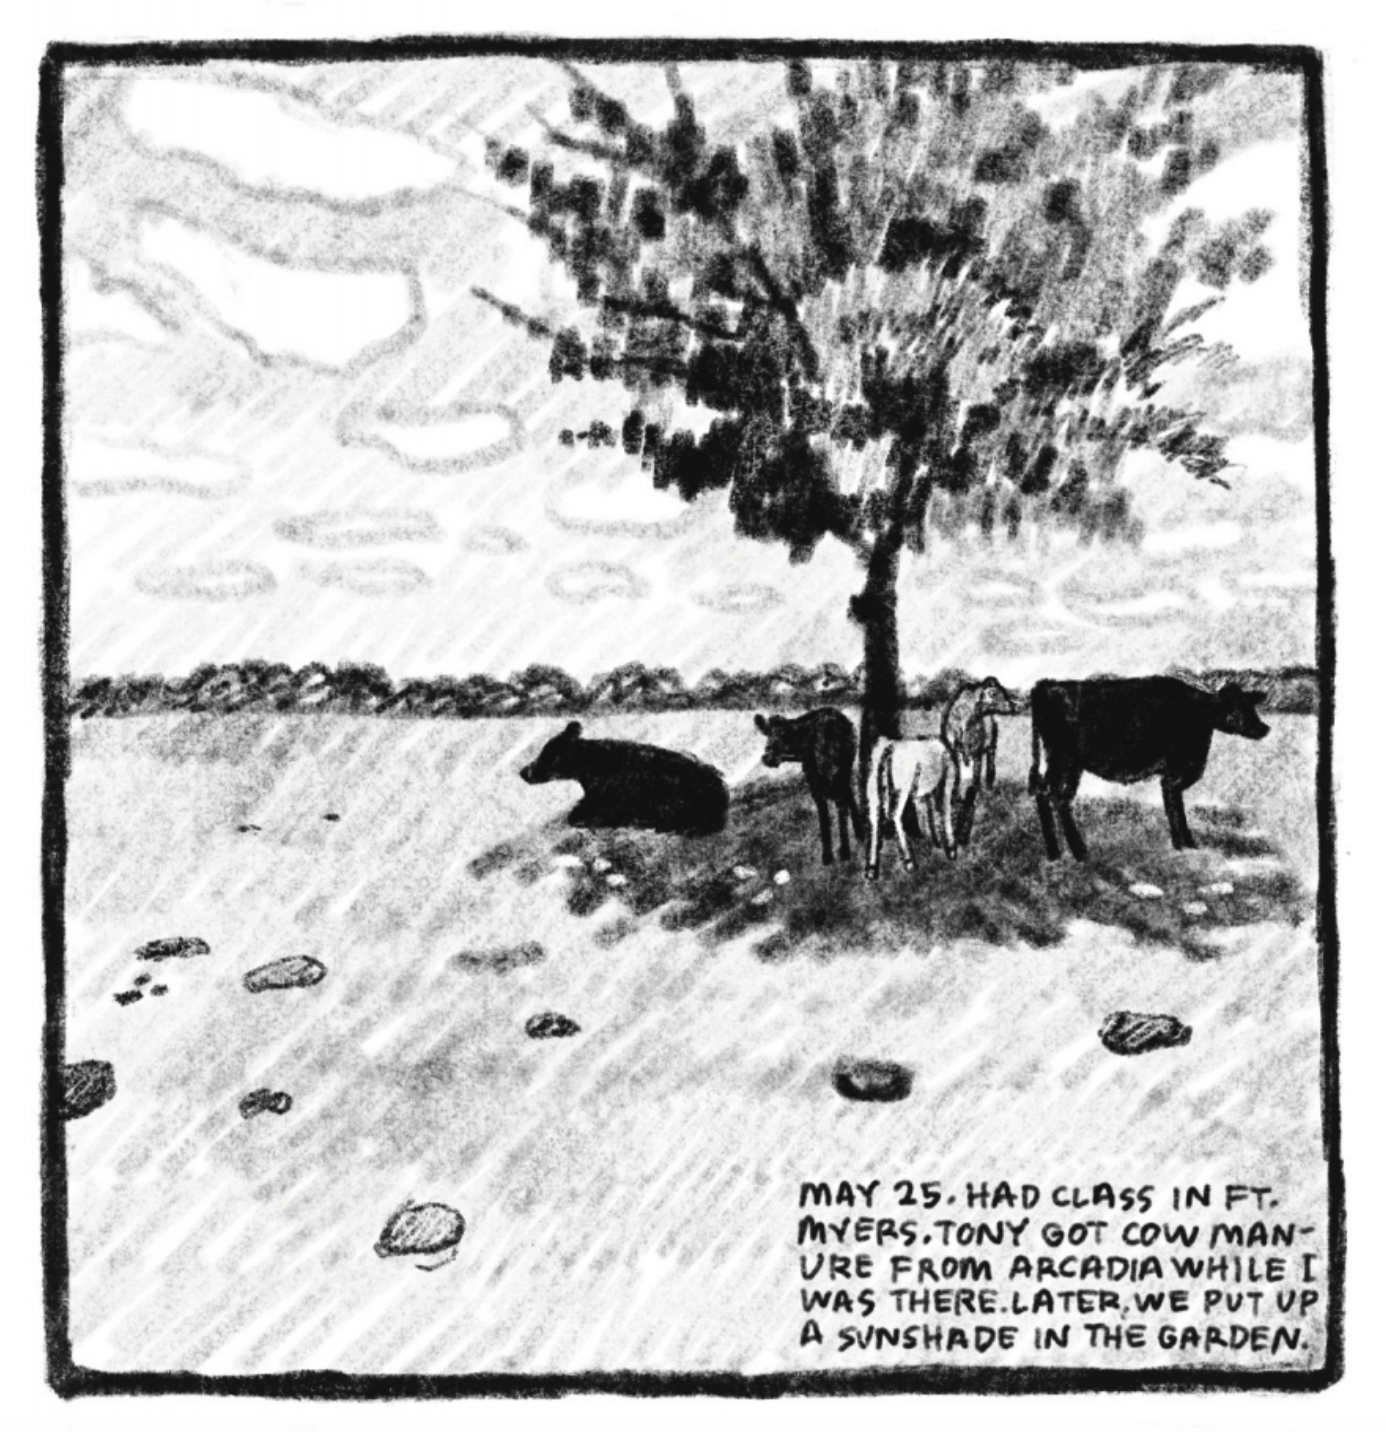 A group of cattle rests in the shade of a lone tree in a large field of grass. The sky is dotted with clouds. 
"May 25. Had class in Fort Myers. Tony got cow manure from Arcadia while I was there. Later, we put up a sunshade in the garden."